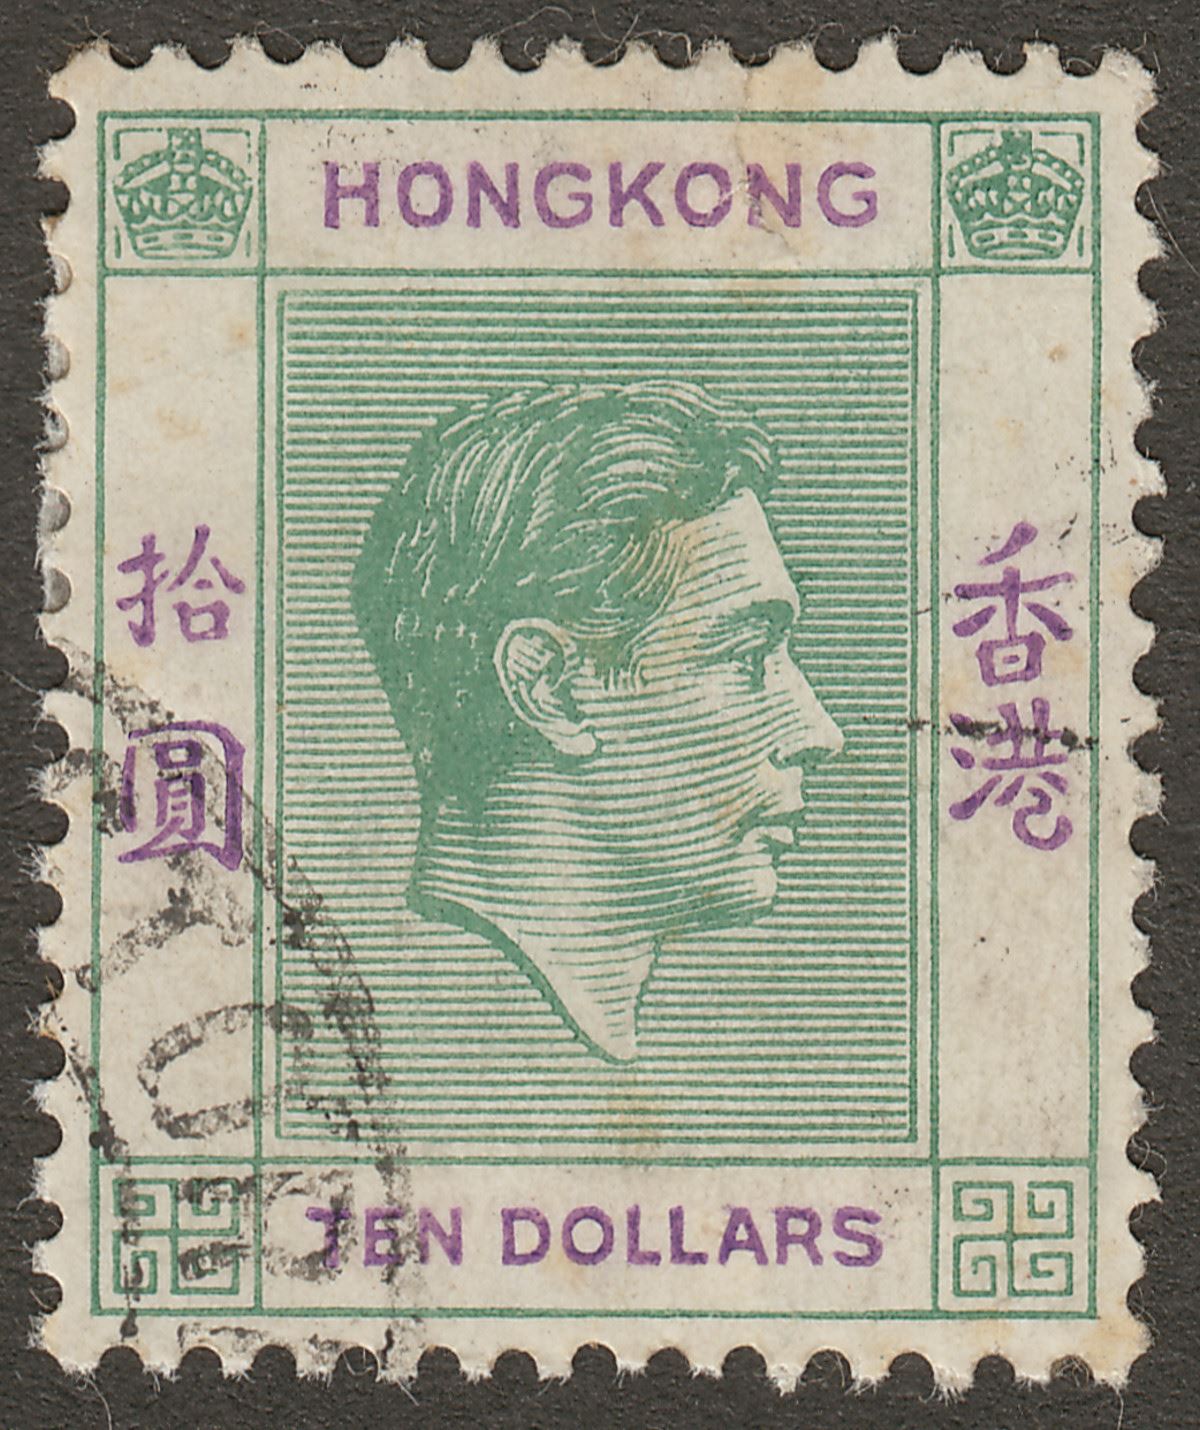 Hong Kong 1938 KGVI $10 Green and Violet Used SG161 cat £140 some issues